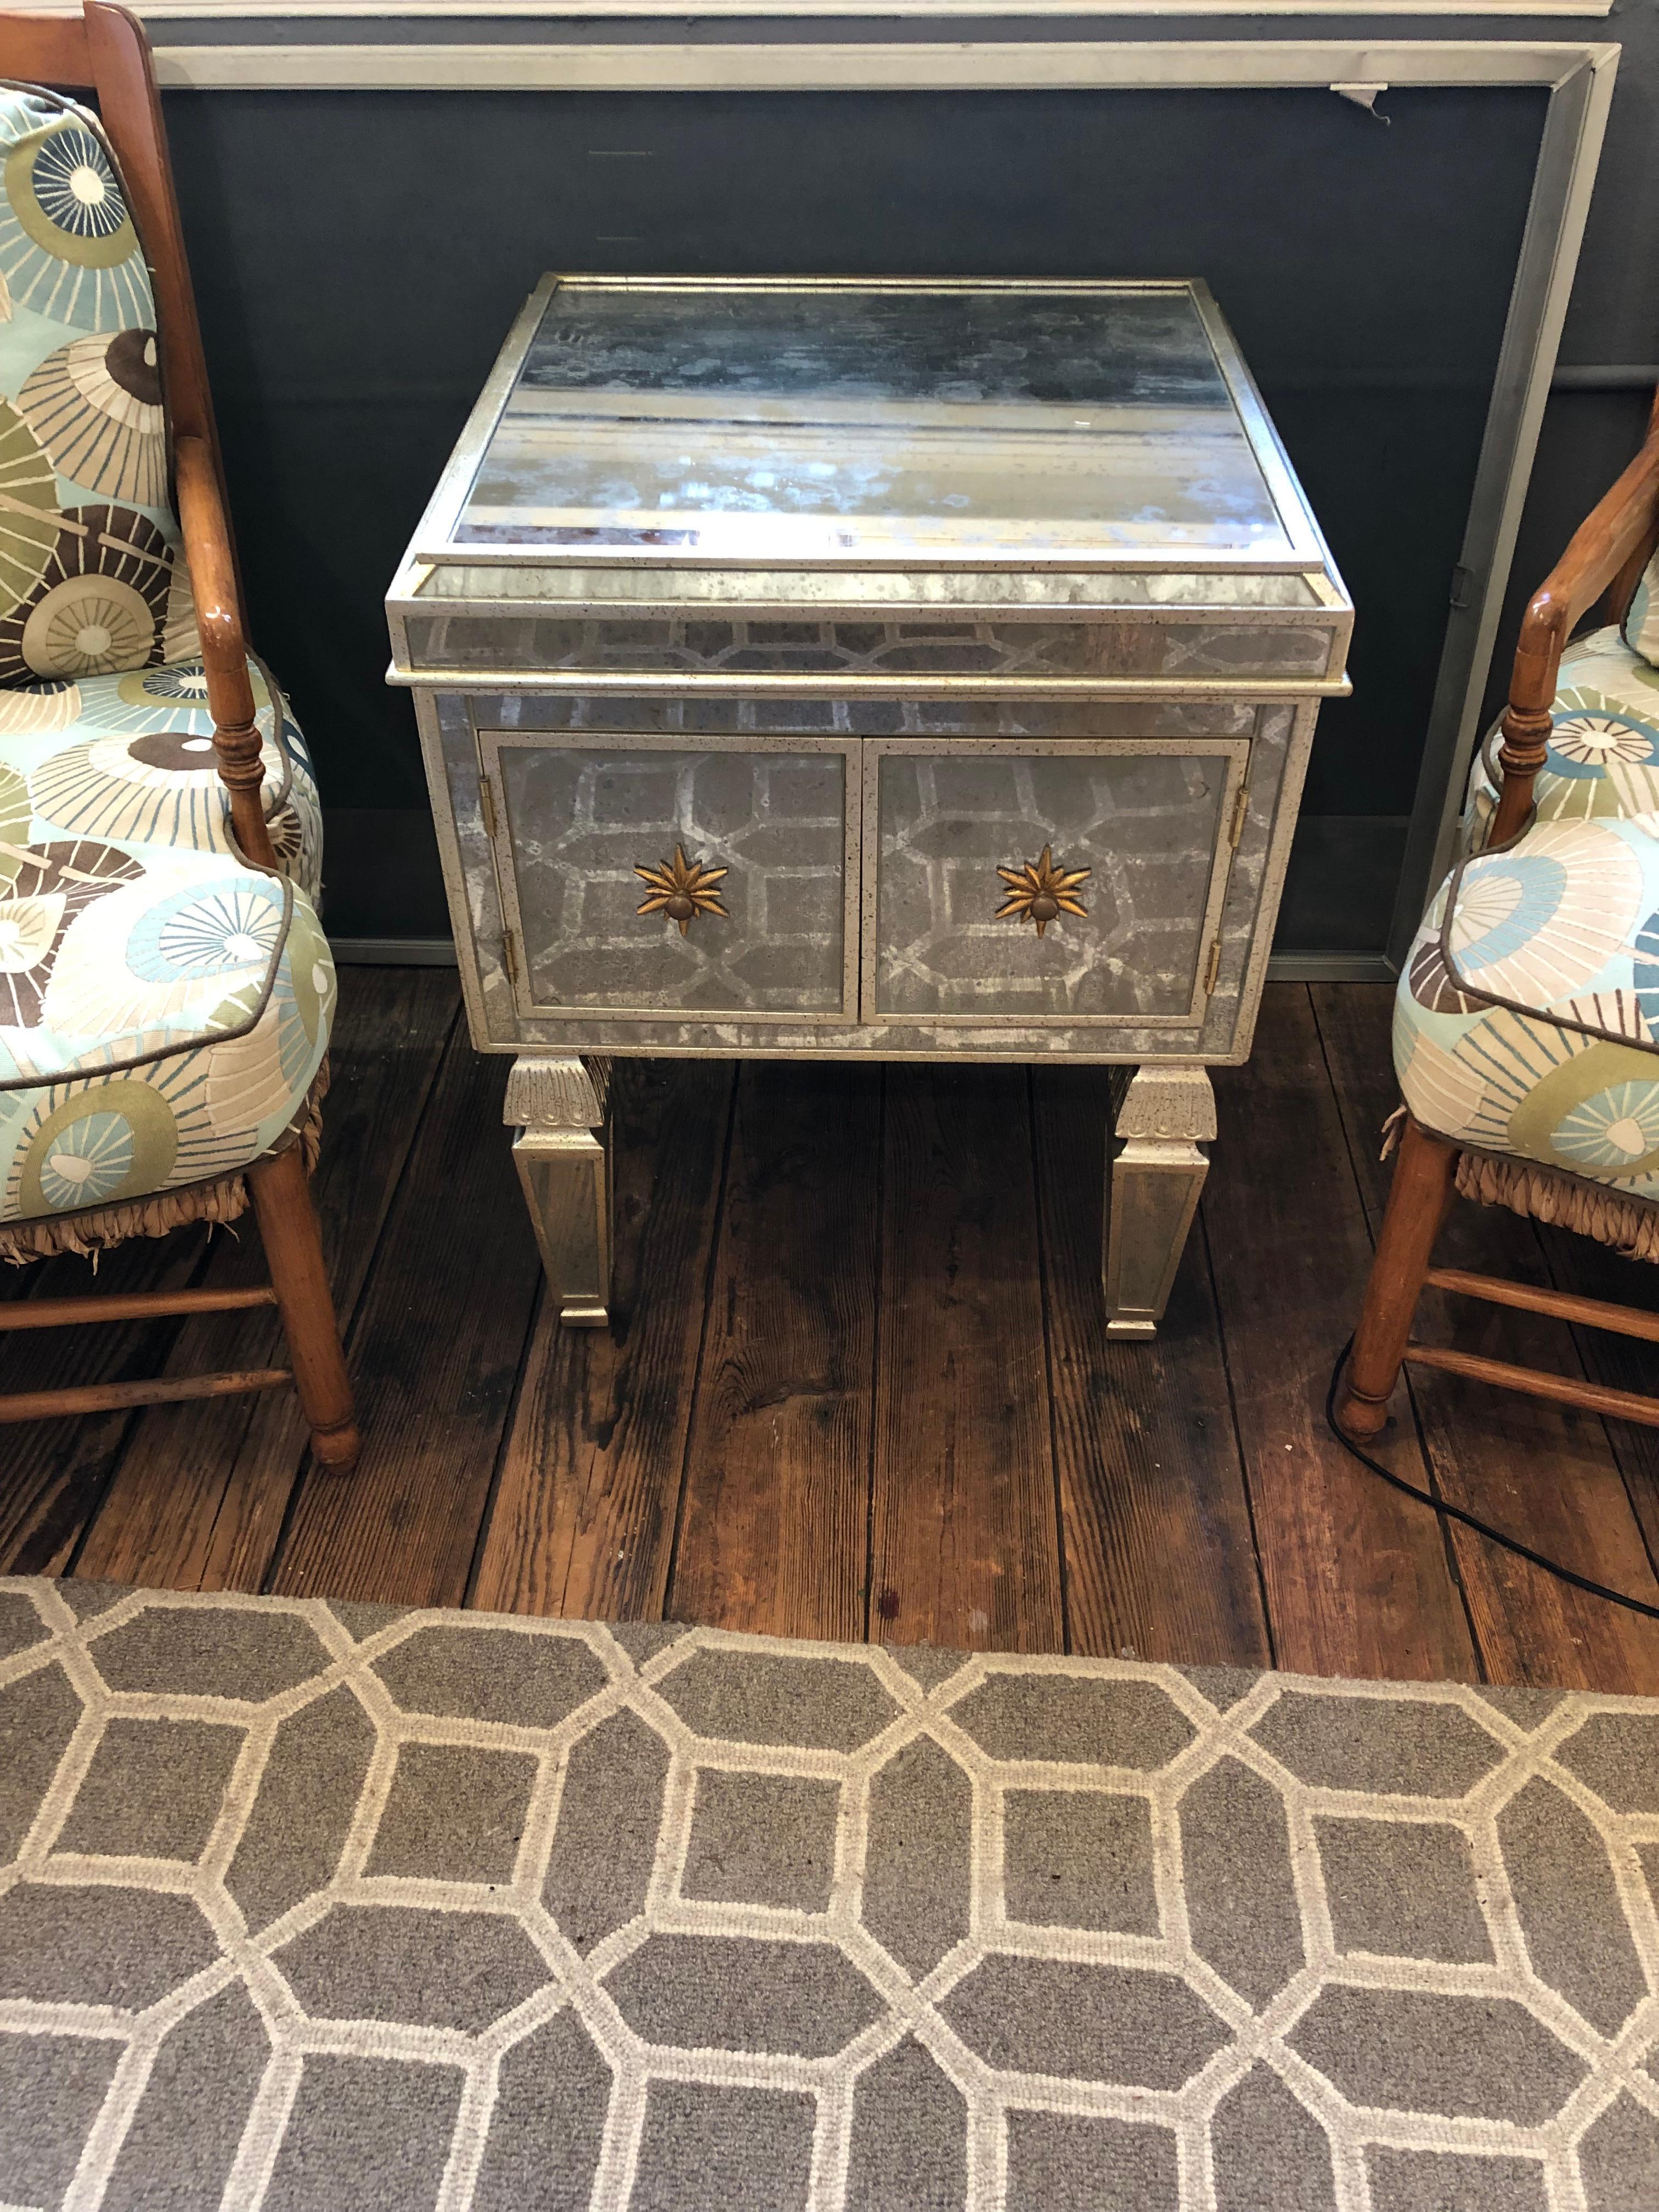 A glamorous square aged mirror side table cabinet having two doors that reveal storage inside, handsome mirrored sculpted legs, and contrasting sunburst gold knobs on the doors.